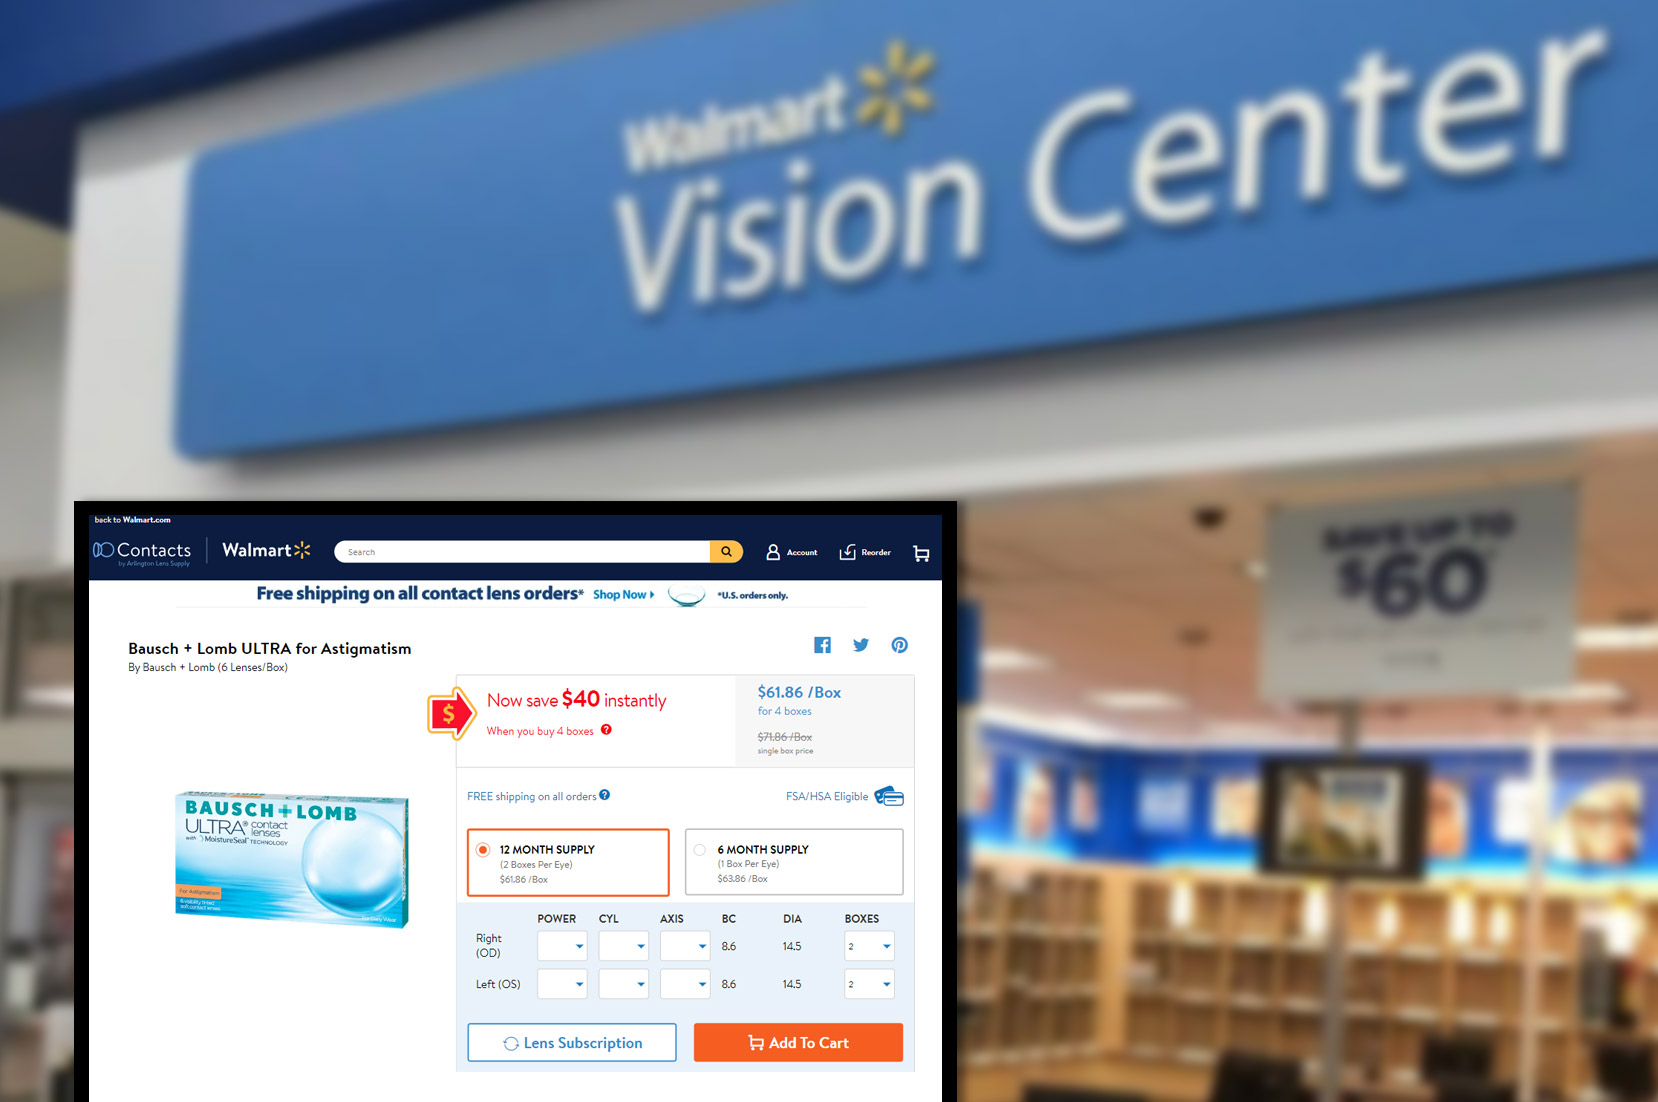 walmartcontacts-comproduct-pricing-information-and-image-scraping-services